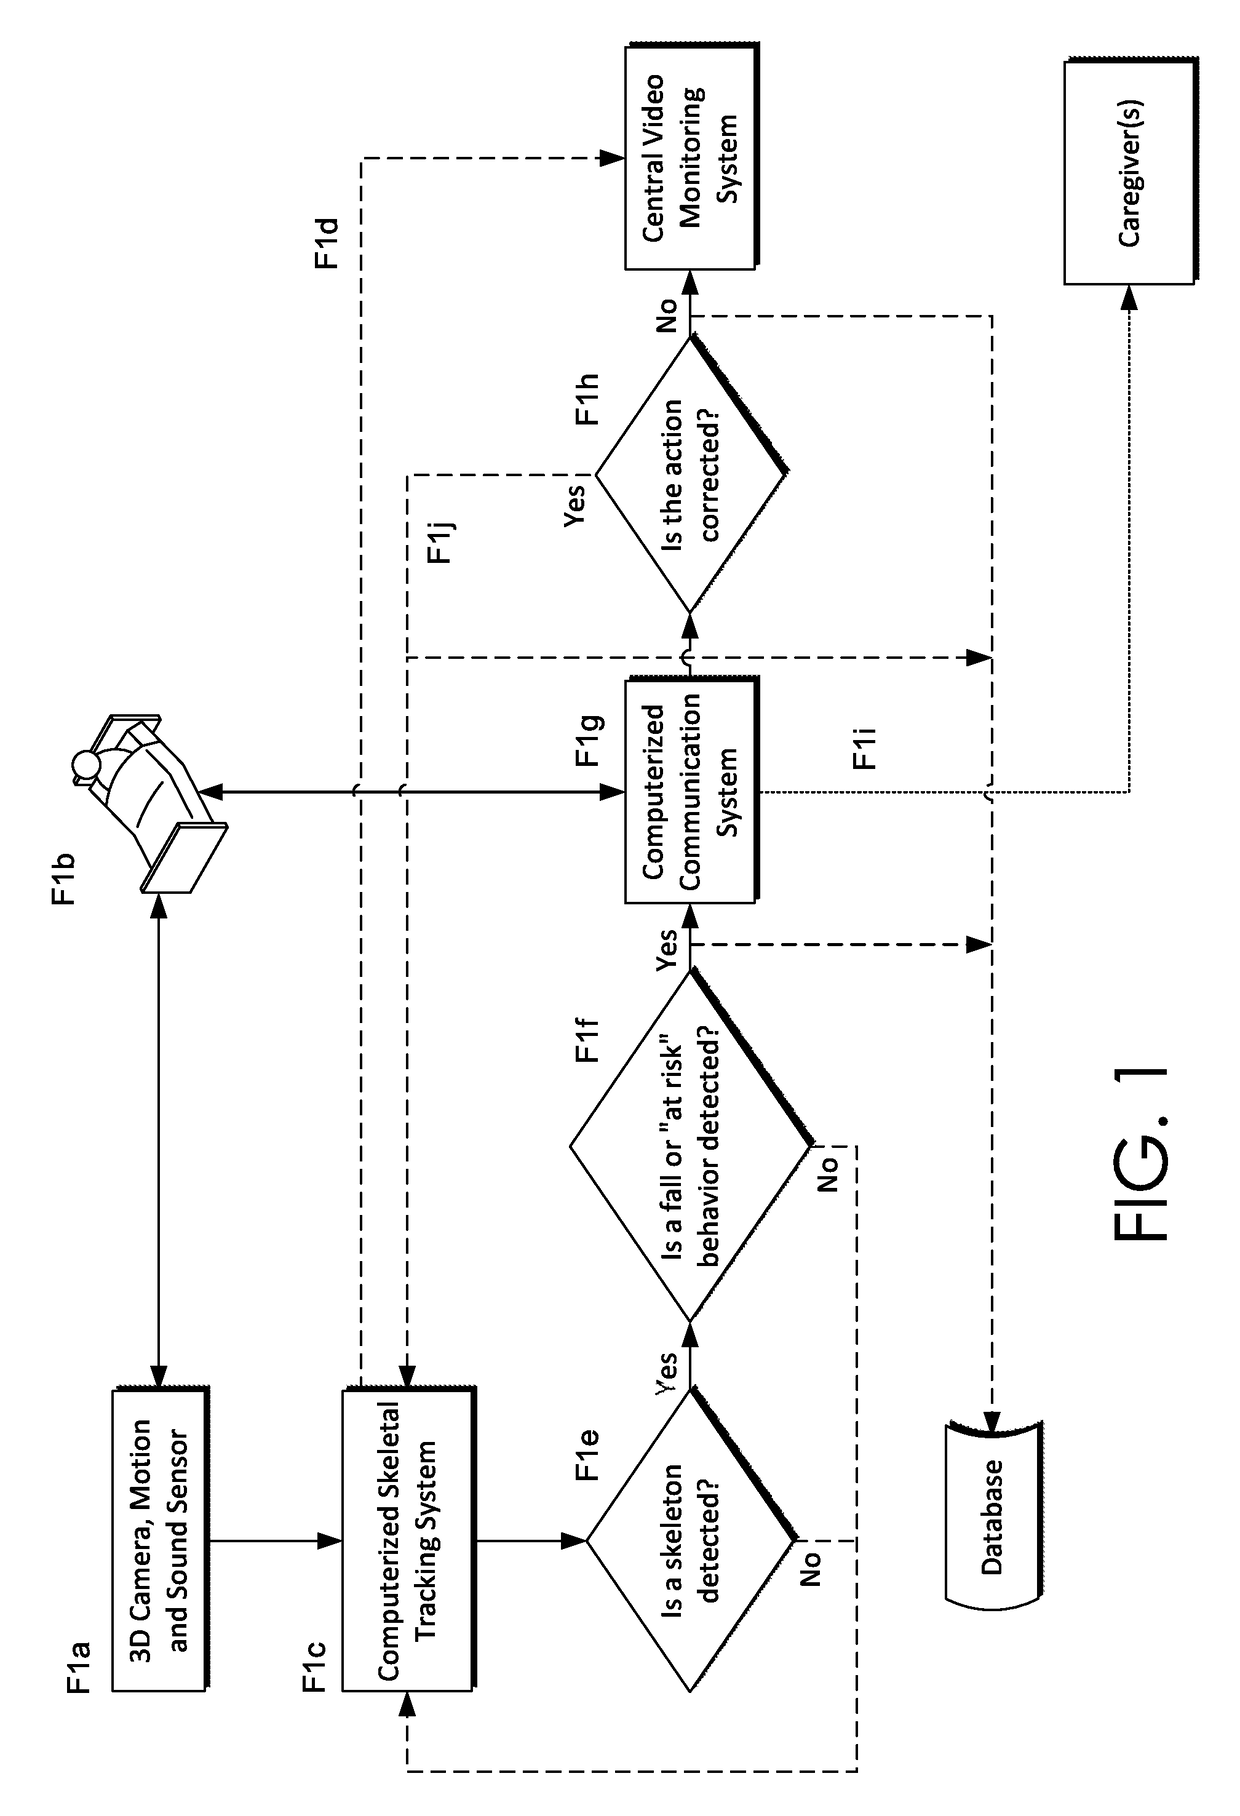 Method for Determining Whether an Individual Enters a Prescribed Virtual Zone Using Skeletal Tracking and 3D Blob Detection